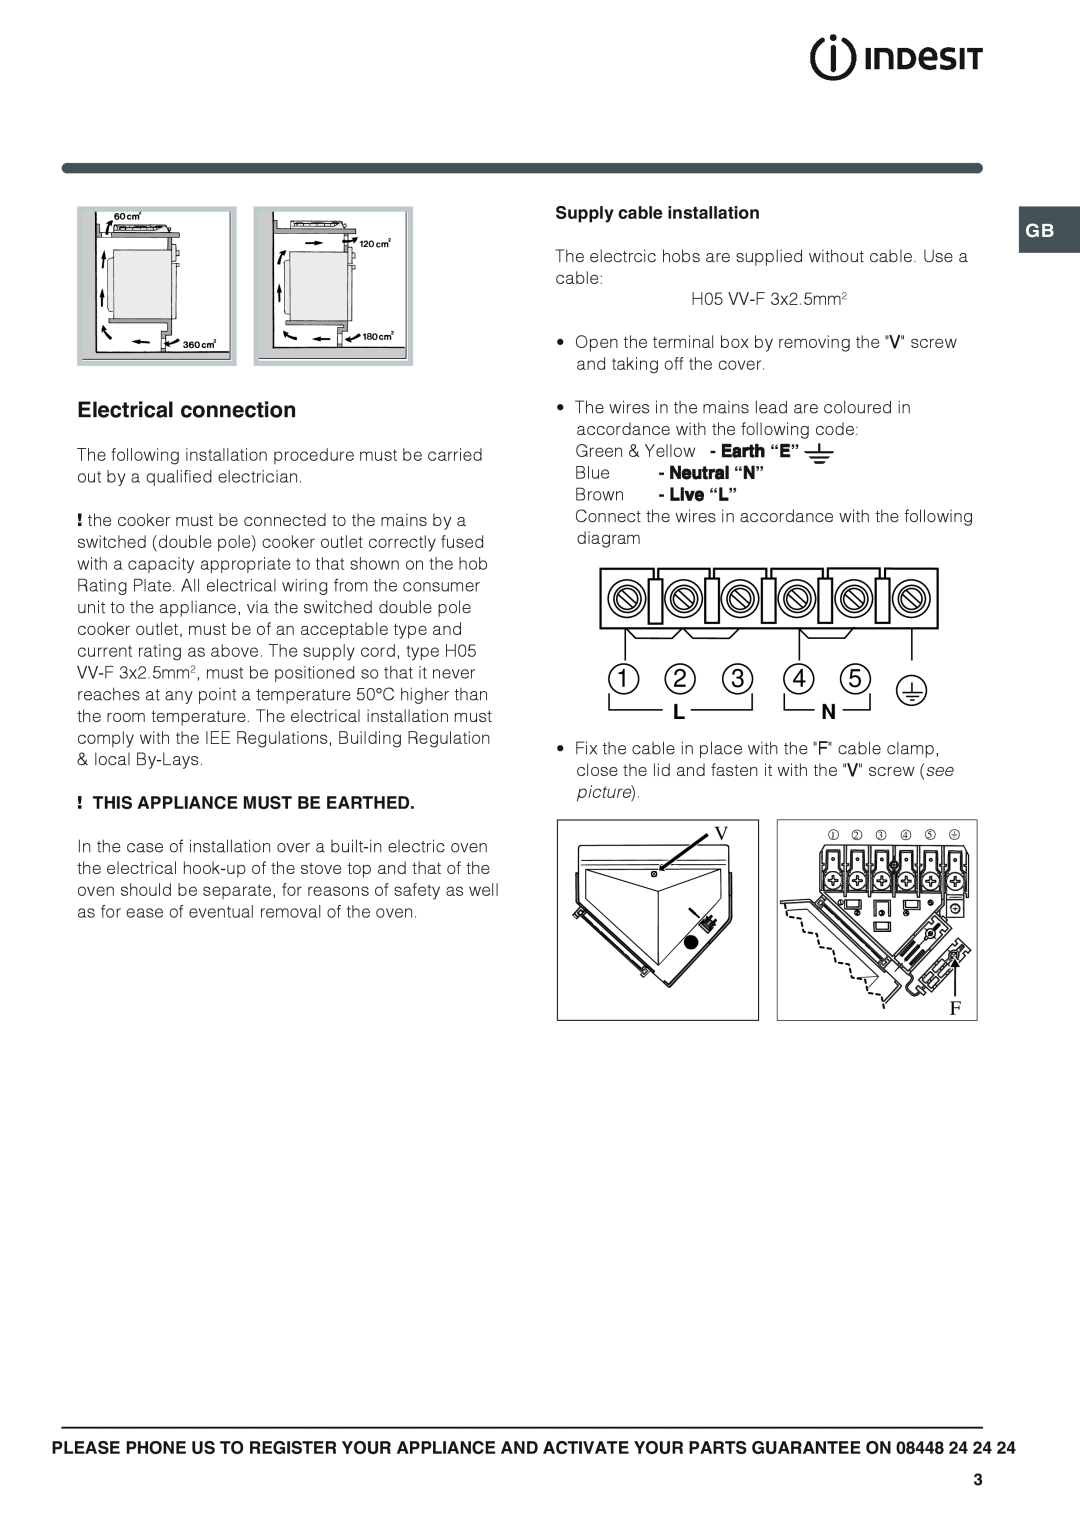 Indesit PIM 604GB manual Electrical connection 